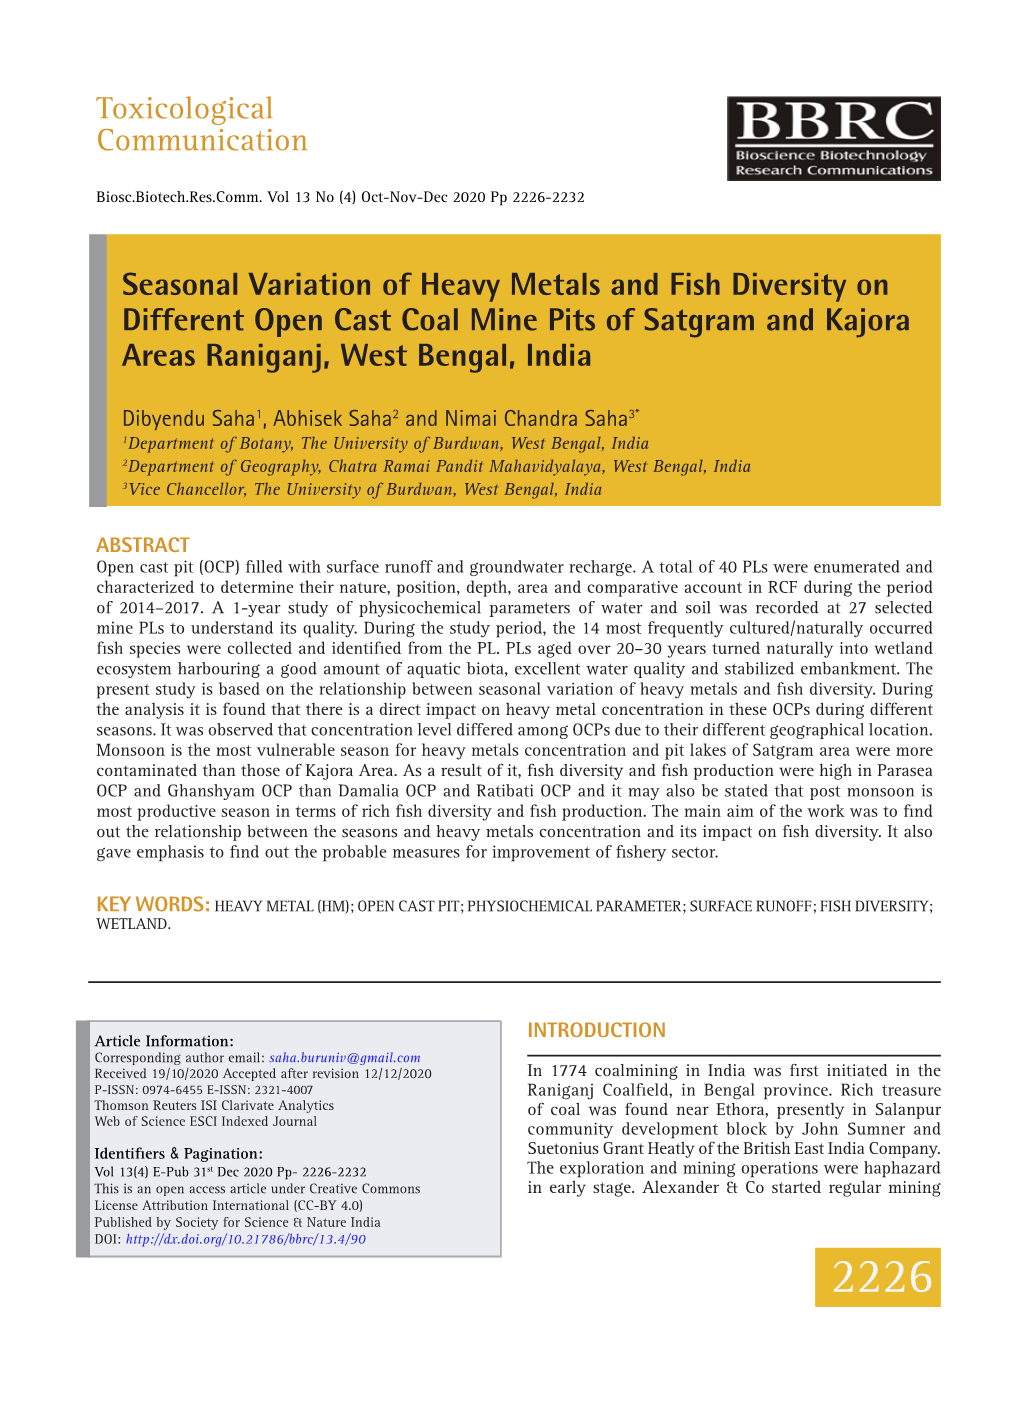 Seasonal Variation of Heavy Metals and Fish Diversity on Different Open Cast Coal Mine Pits of Satgram and Kajora Areas Raniganj, West Bengal, India